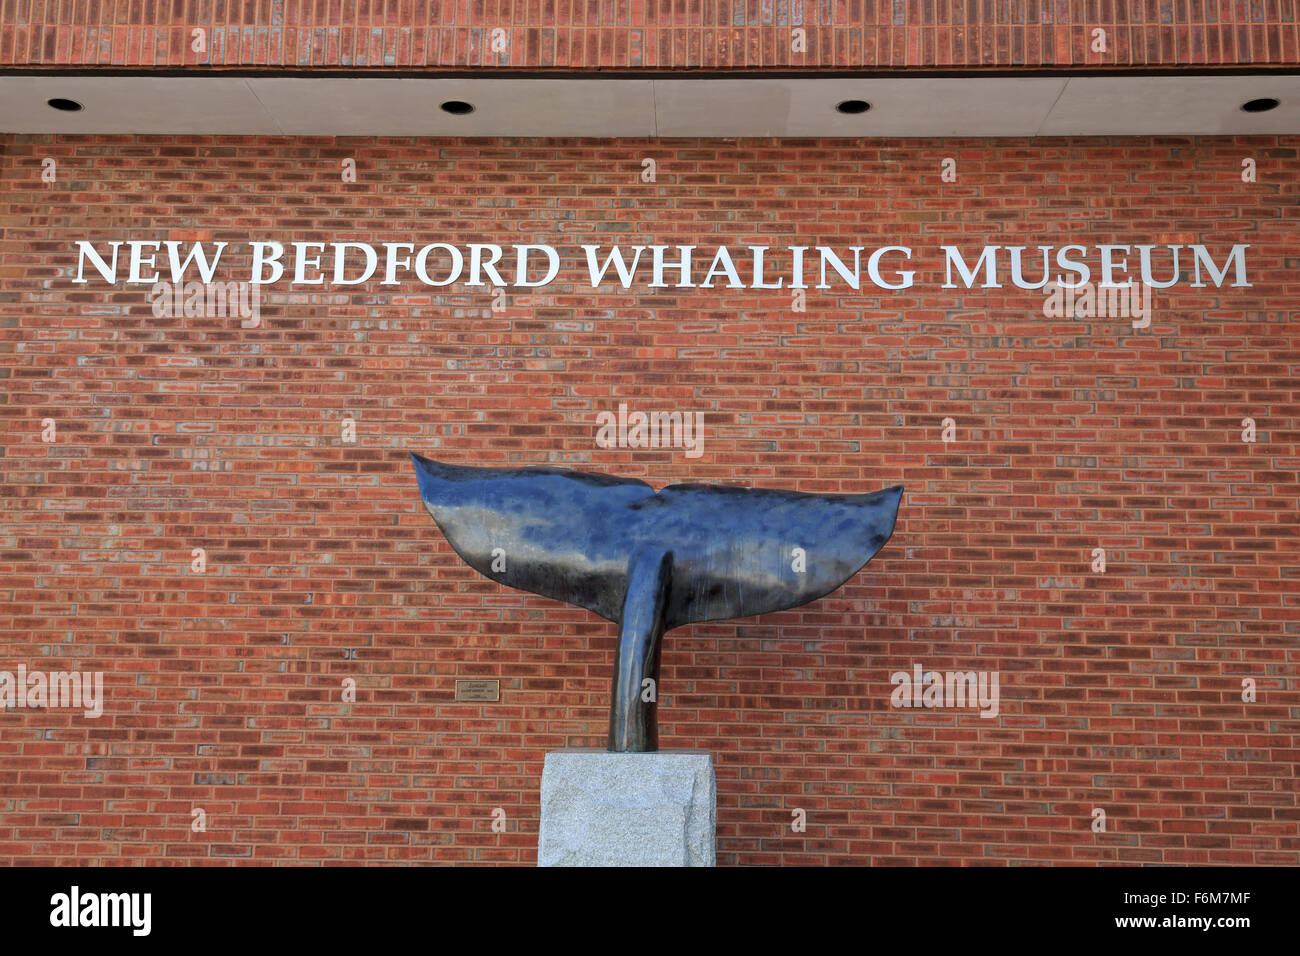 Whaling Museum National Historical Park, New Bedford, Massachusetts, USA Banque D'Images